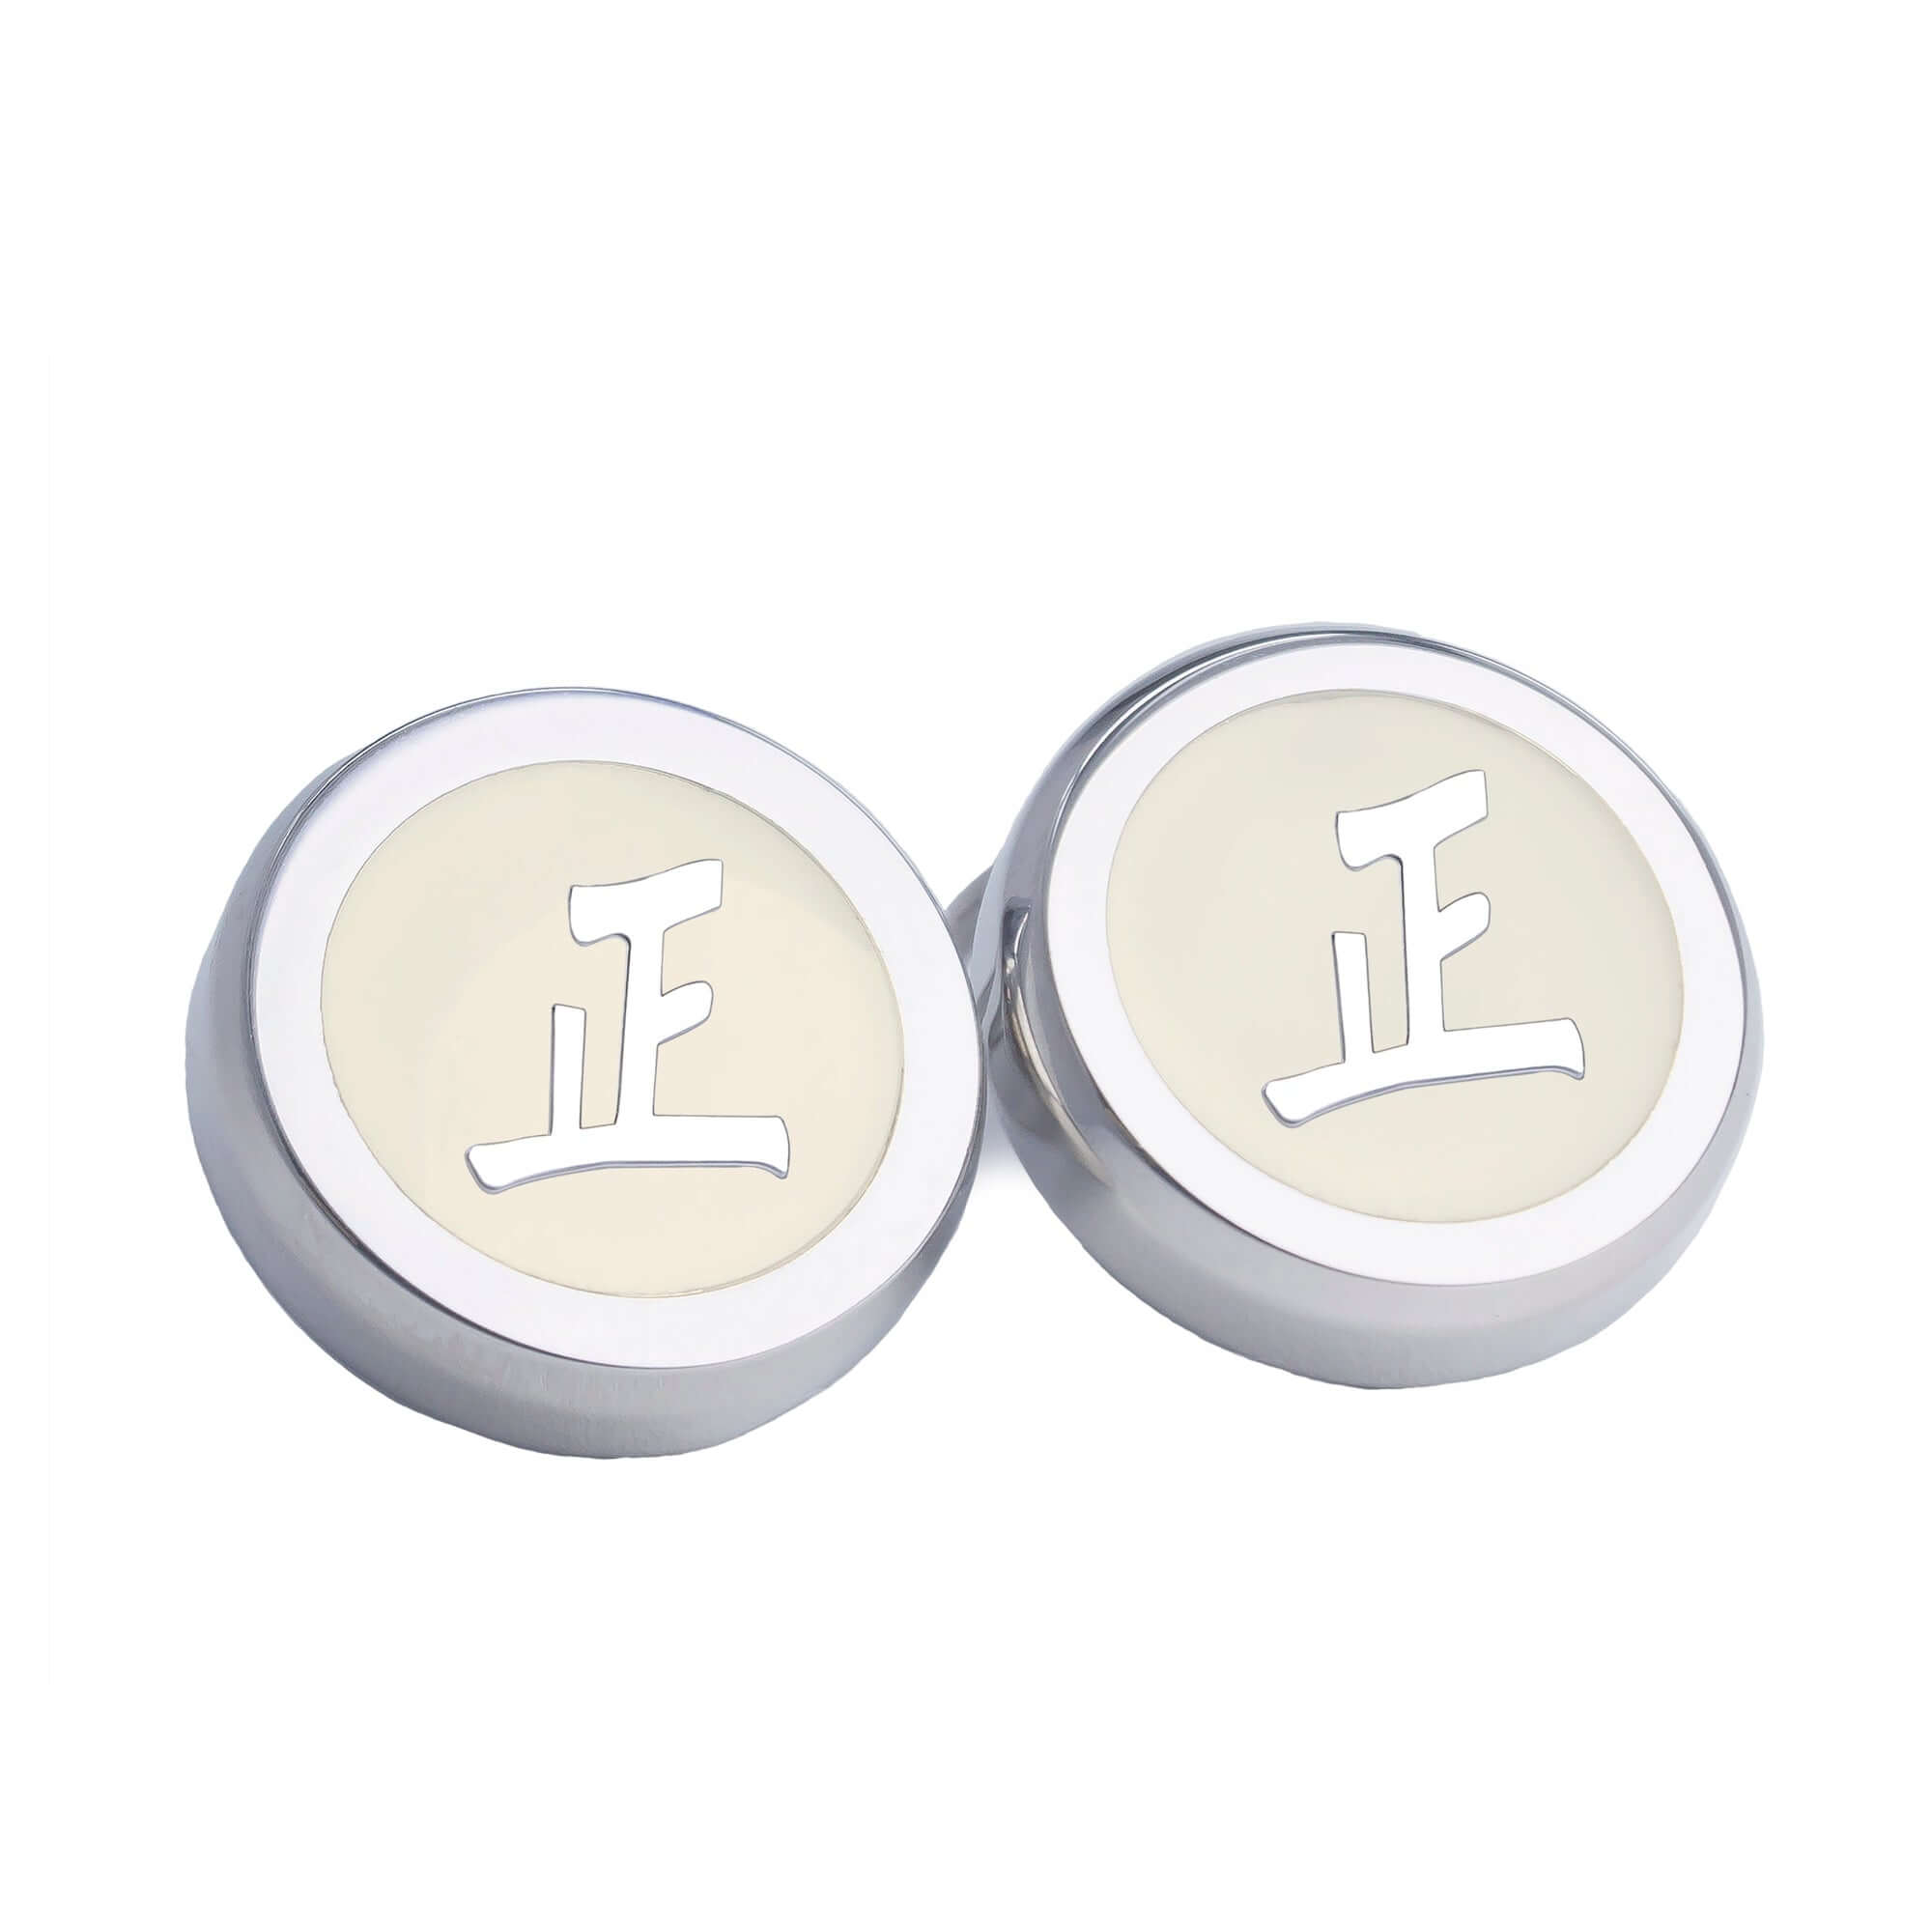 Chinese Character Silver Button Covers-Button Covers-A.Azthom-正 Zheng-Cufflinks.com.sg